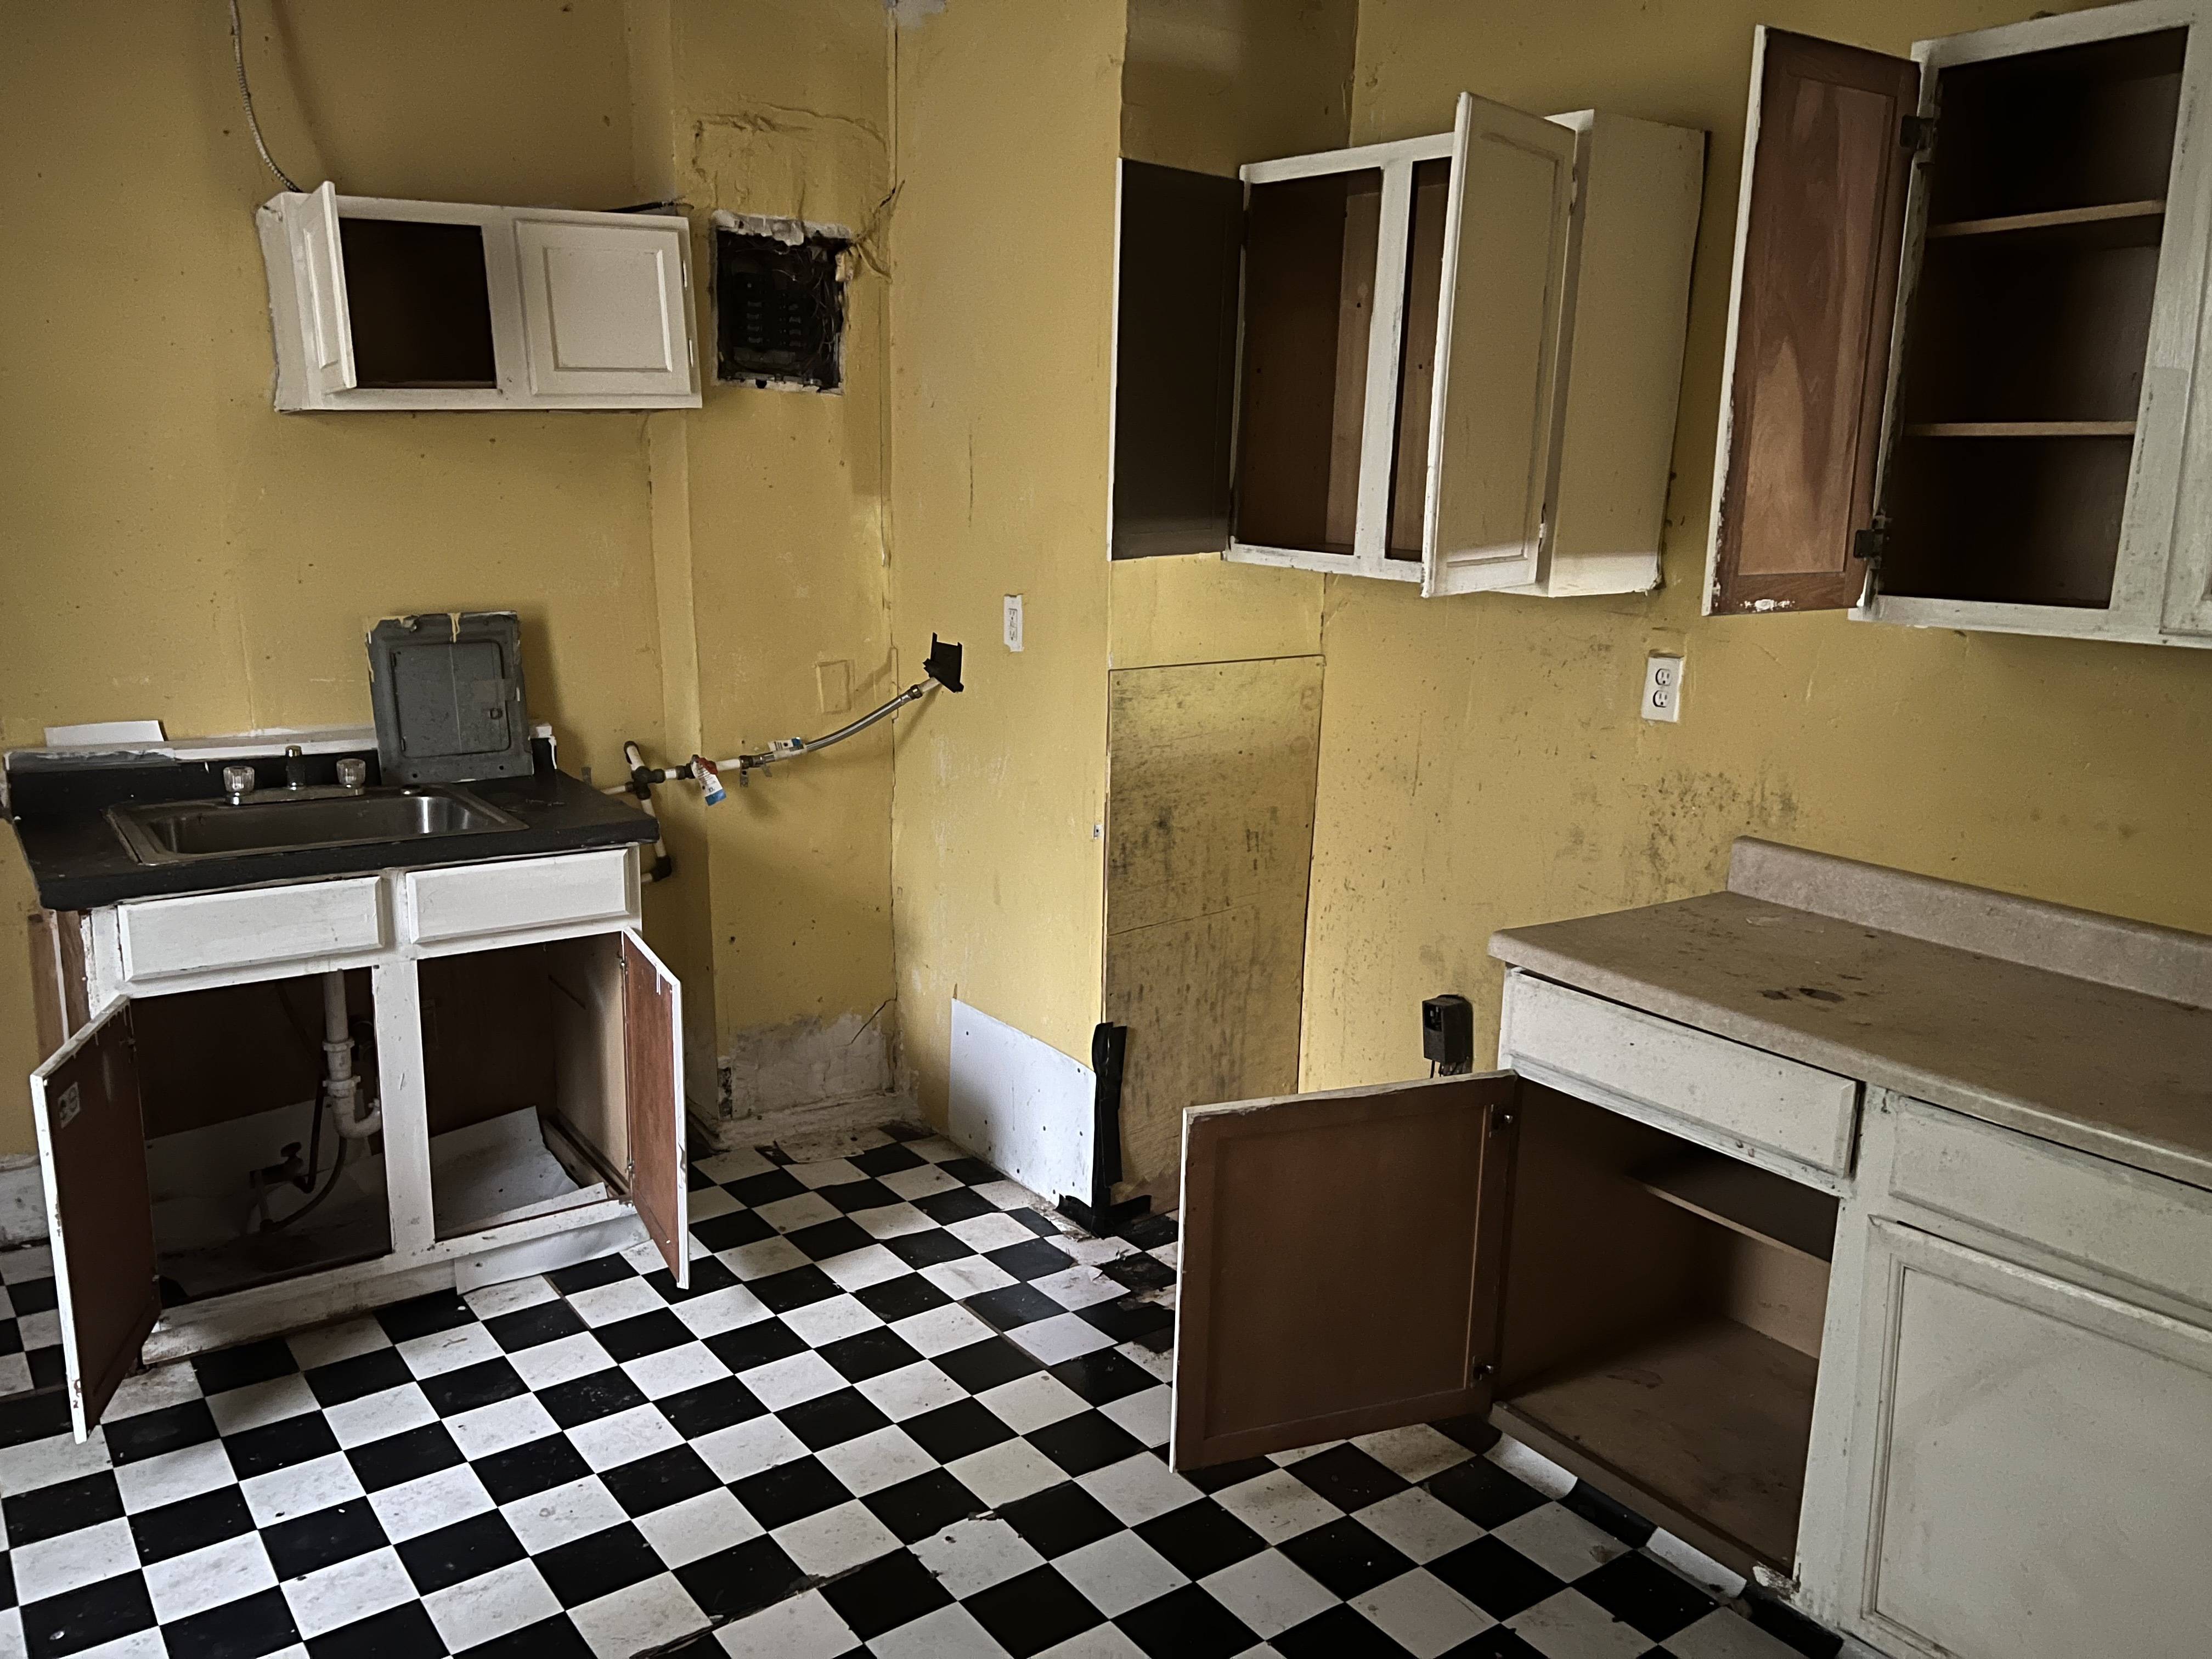 A Property Invest USA investor travelled to Baltimore to survey two properties they own. One was in terrible condition; another had been recently renovated. Neither was being rented.